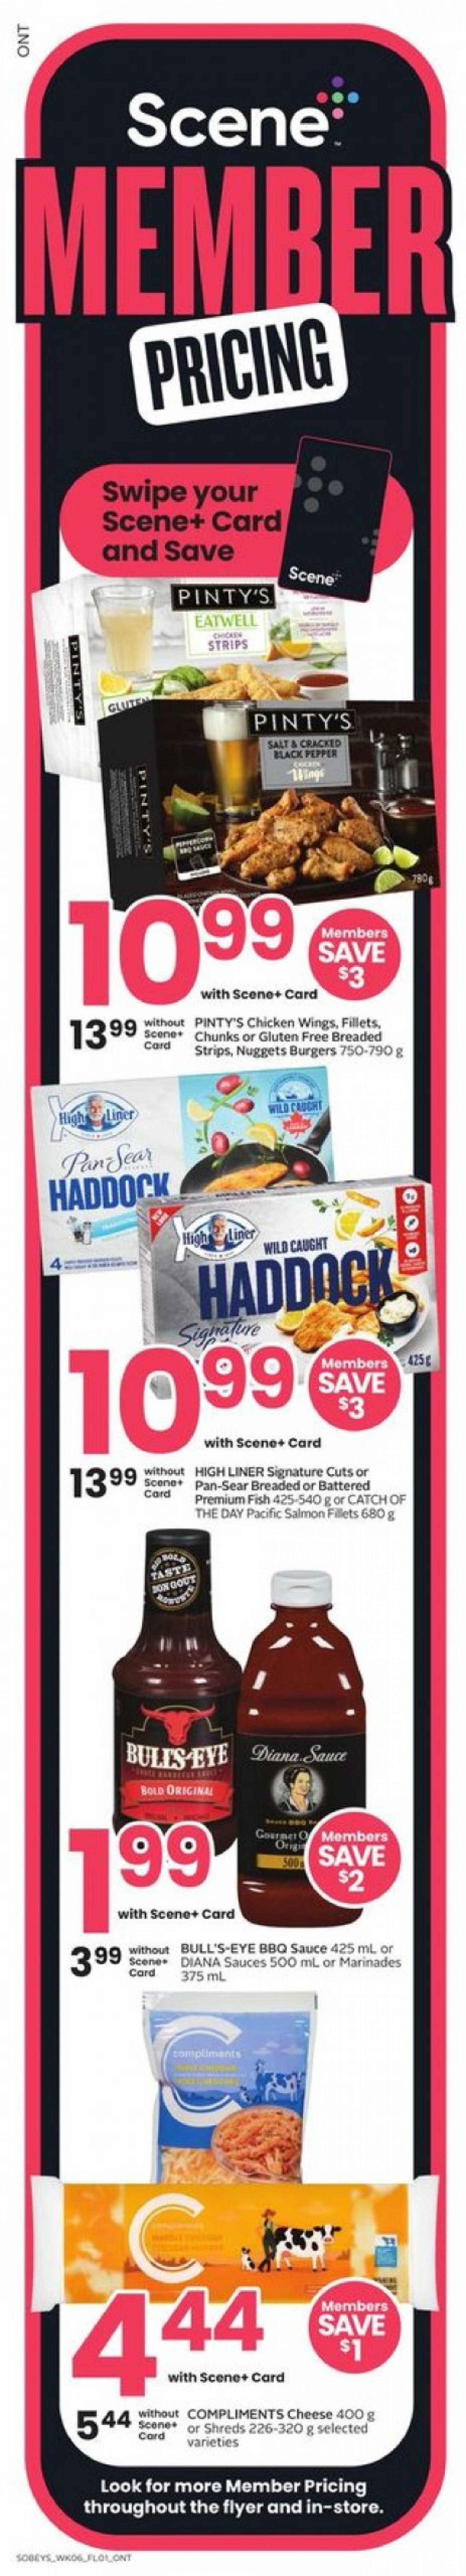 sobeys - Sobeys - Weekly Flyer - Ontario flyer current 06.06. - 12.06. - page: 2